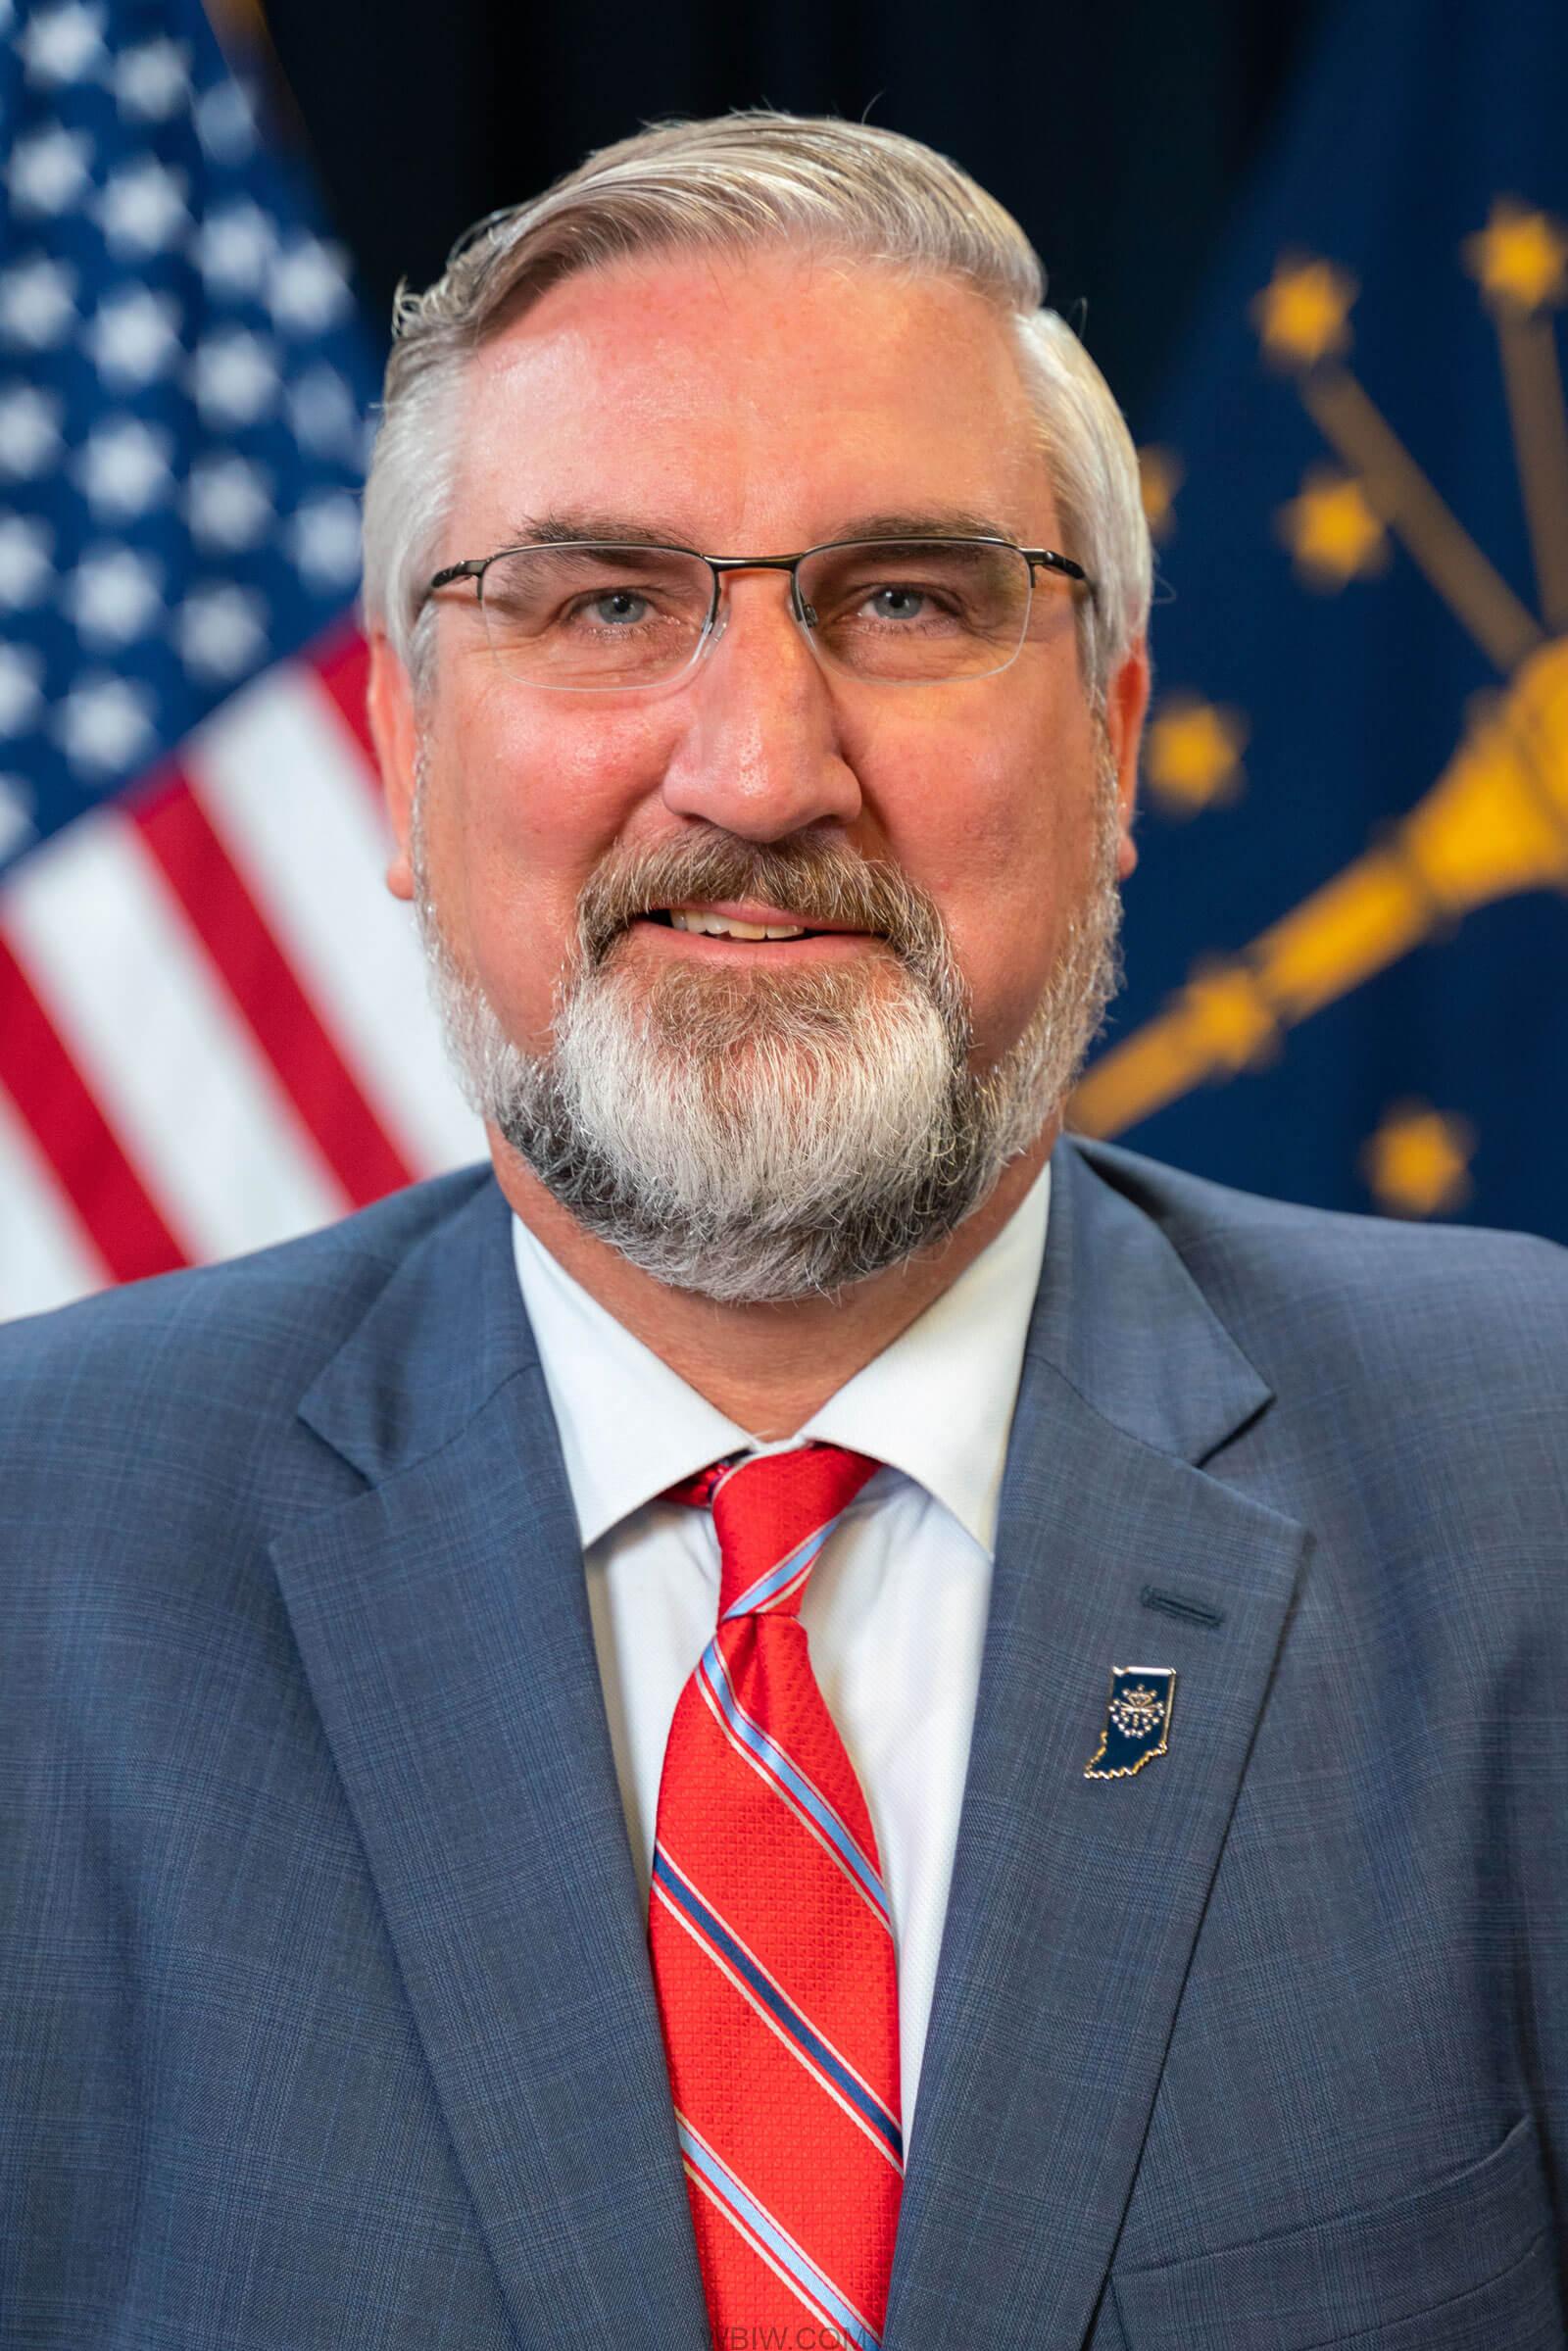 Governor Holcomb makes appointments to various boards and commissions